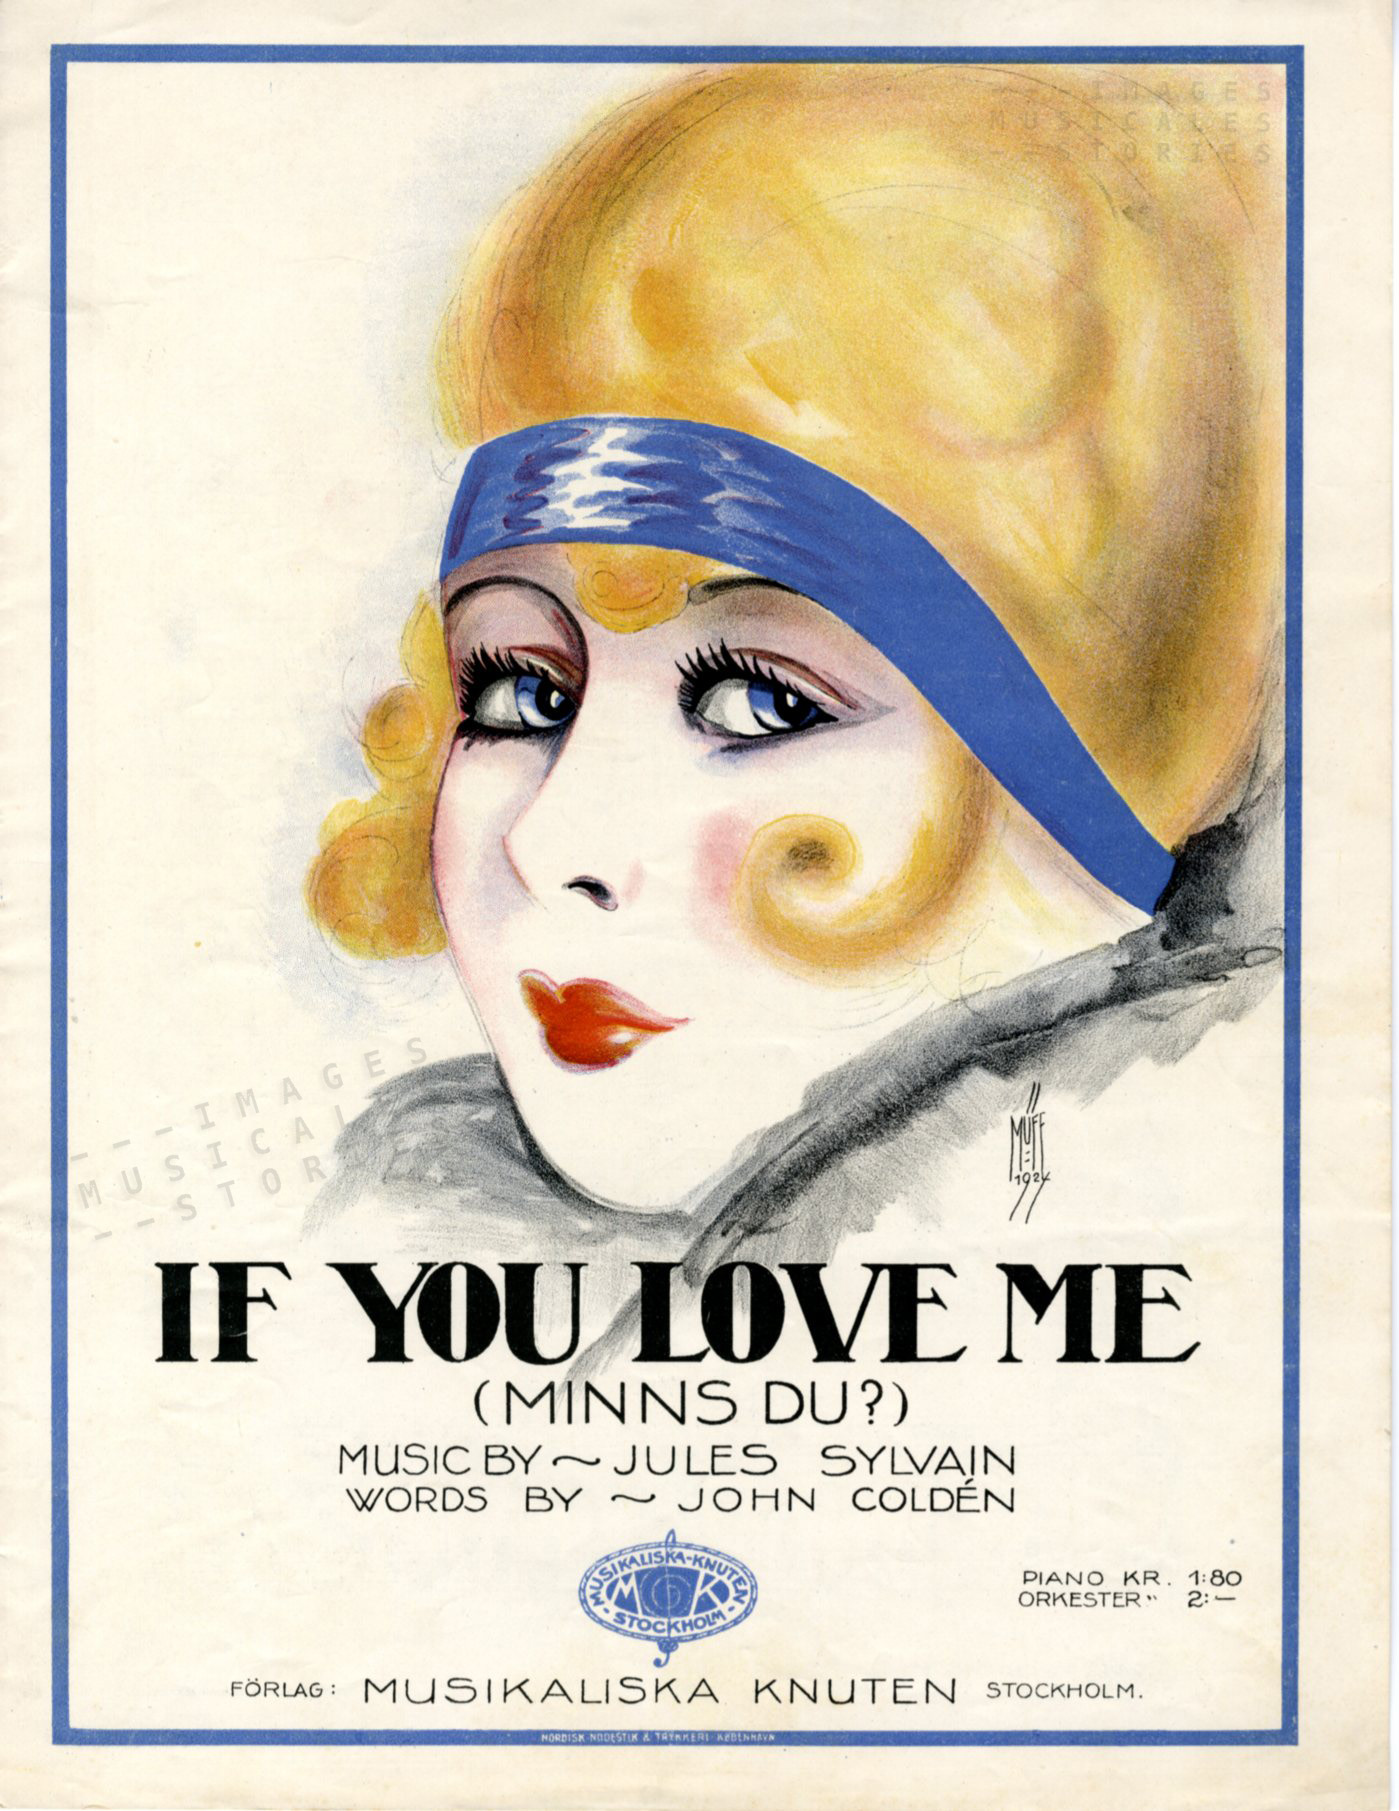 'If you love me', music by Jules Sylvain (1924)